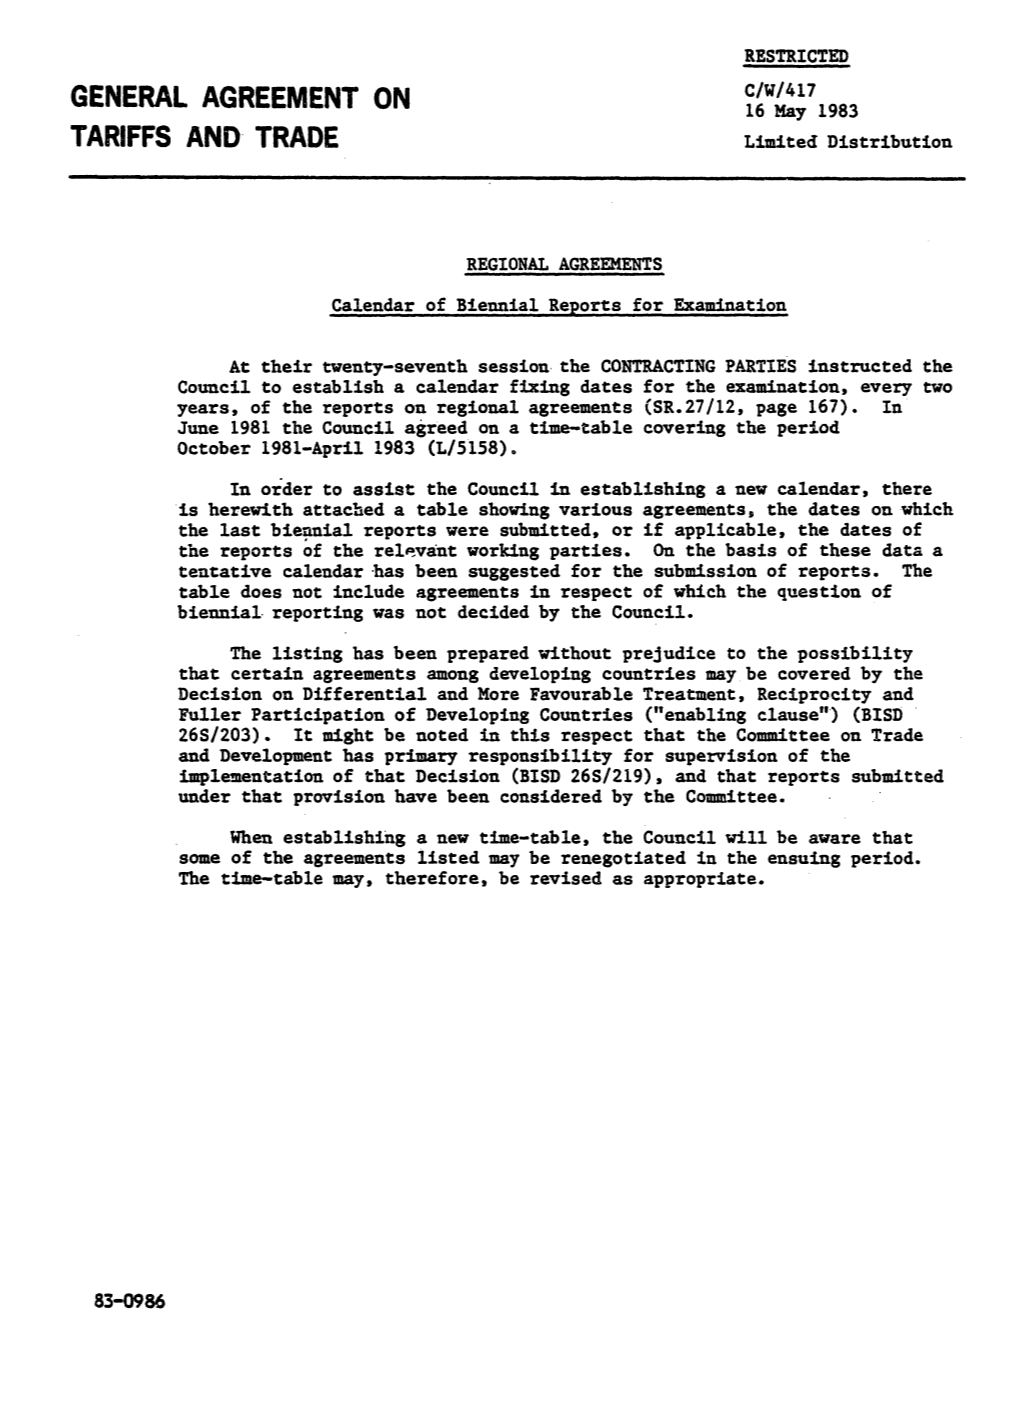 GENERAL AGREEMENT on C/W/41716 May 1983 TARIFFS and TRADE Limited Distribution